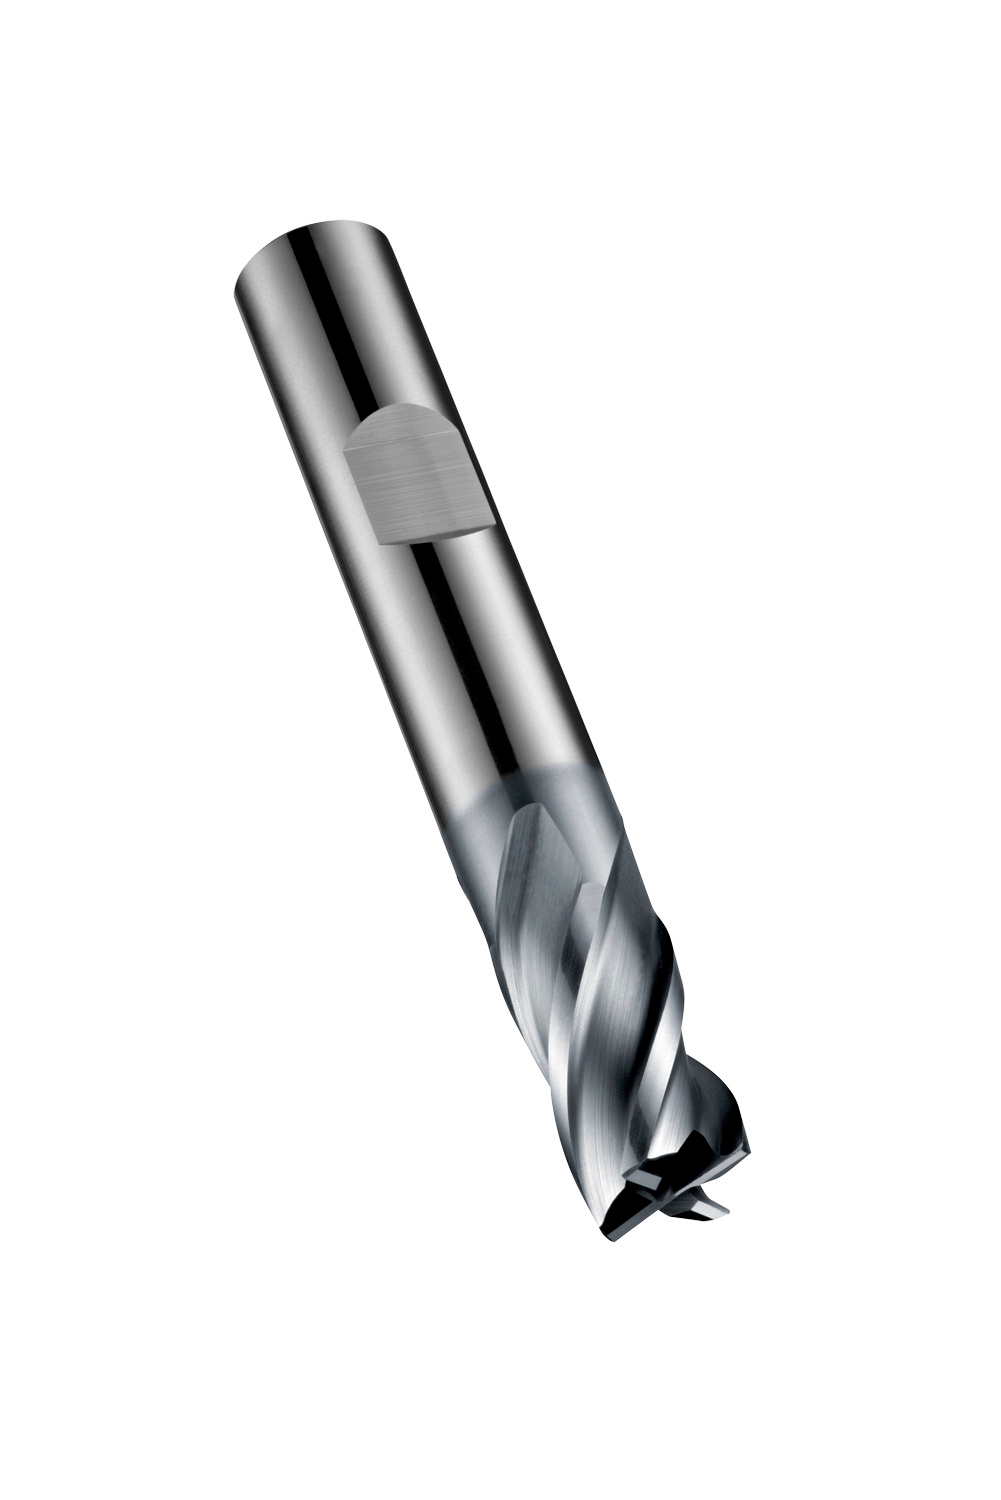 S804HB2.0 - End Mills